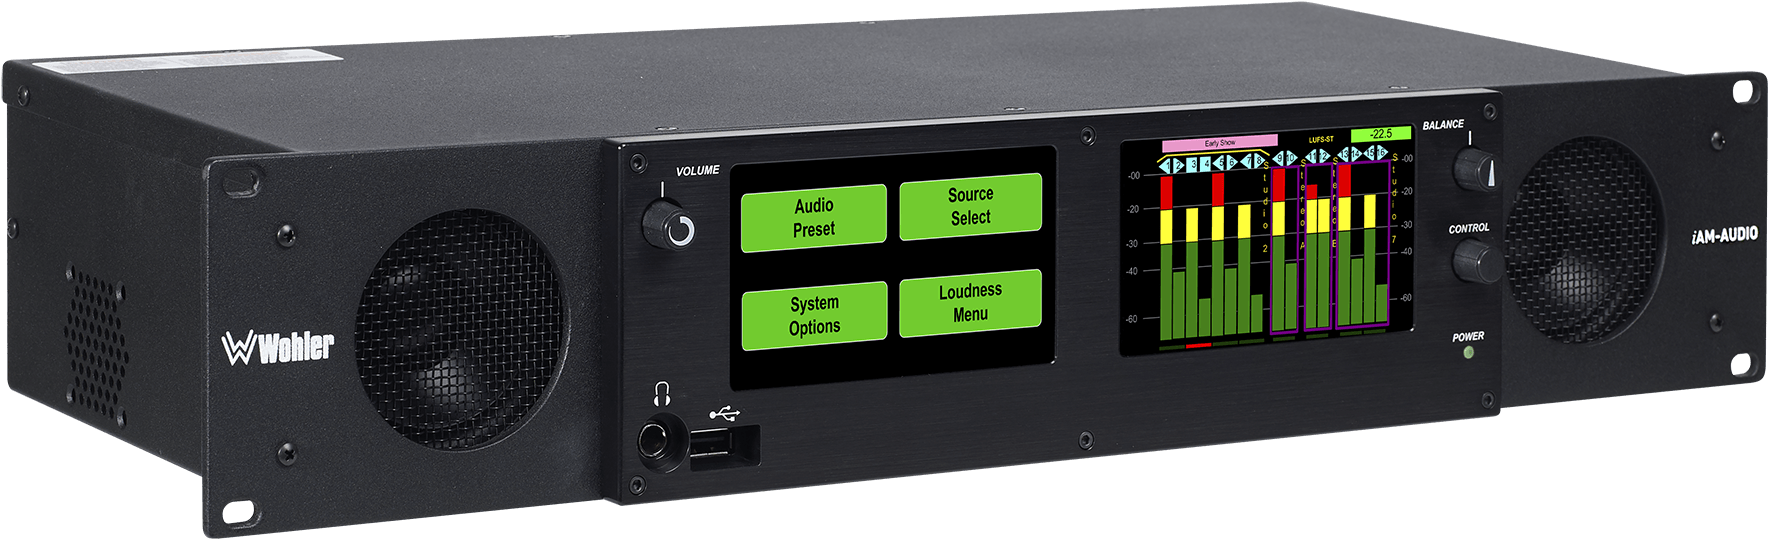 Professional Audio Monitoring Device PNG image